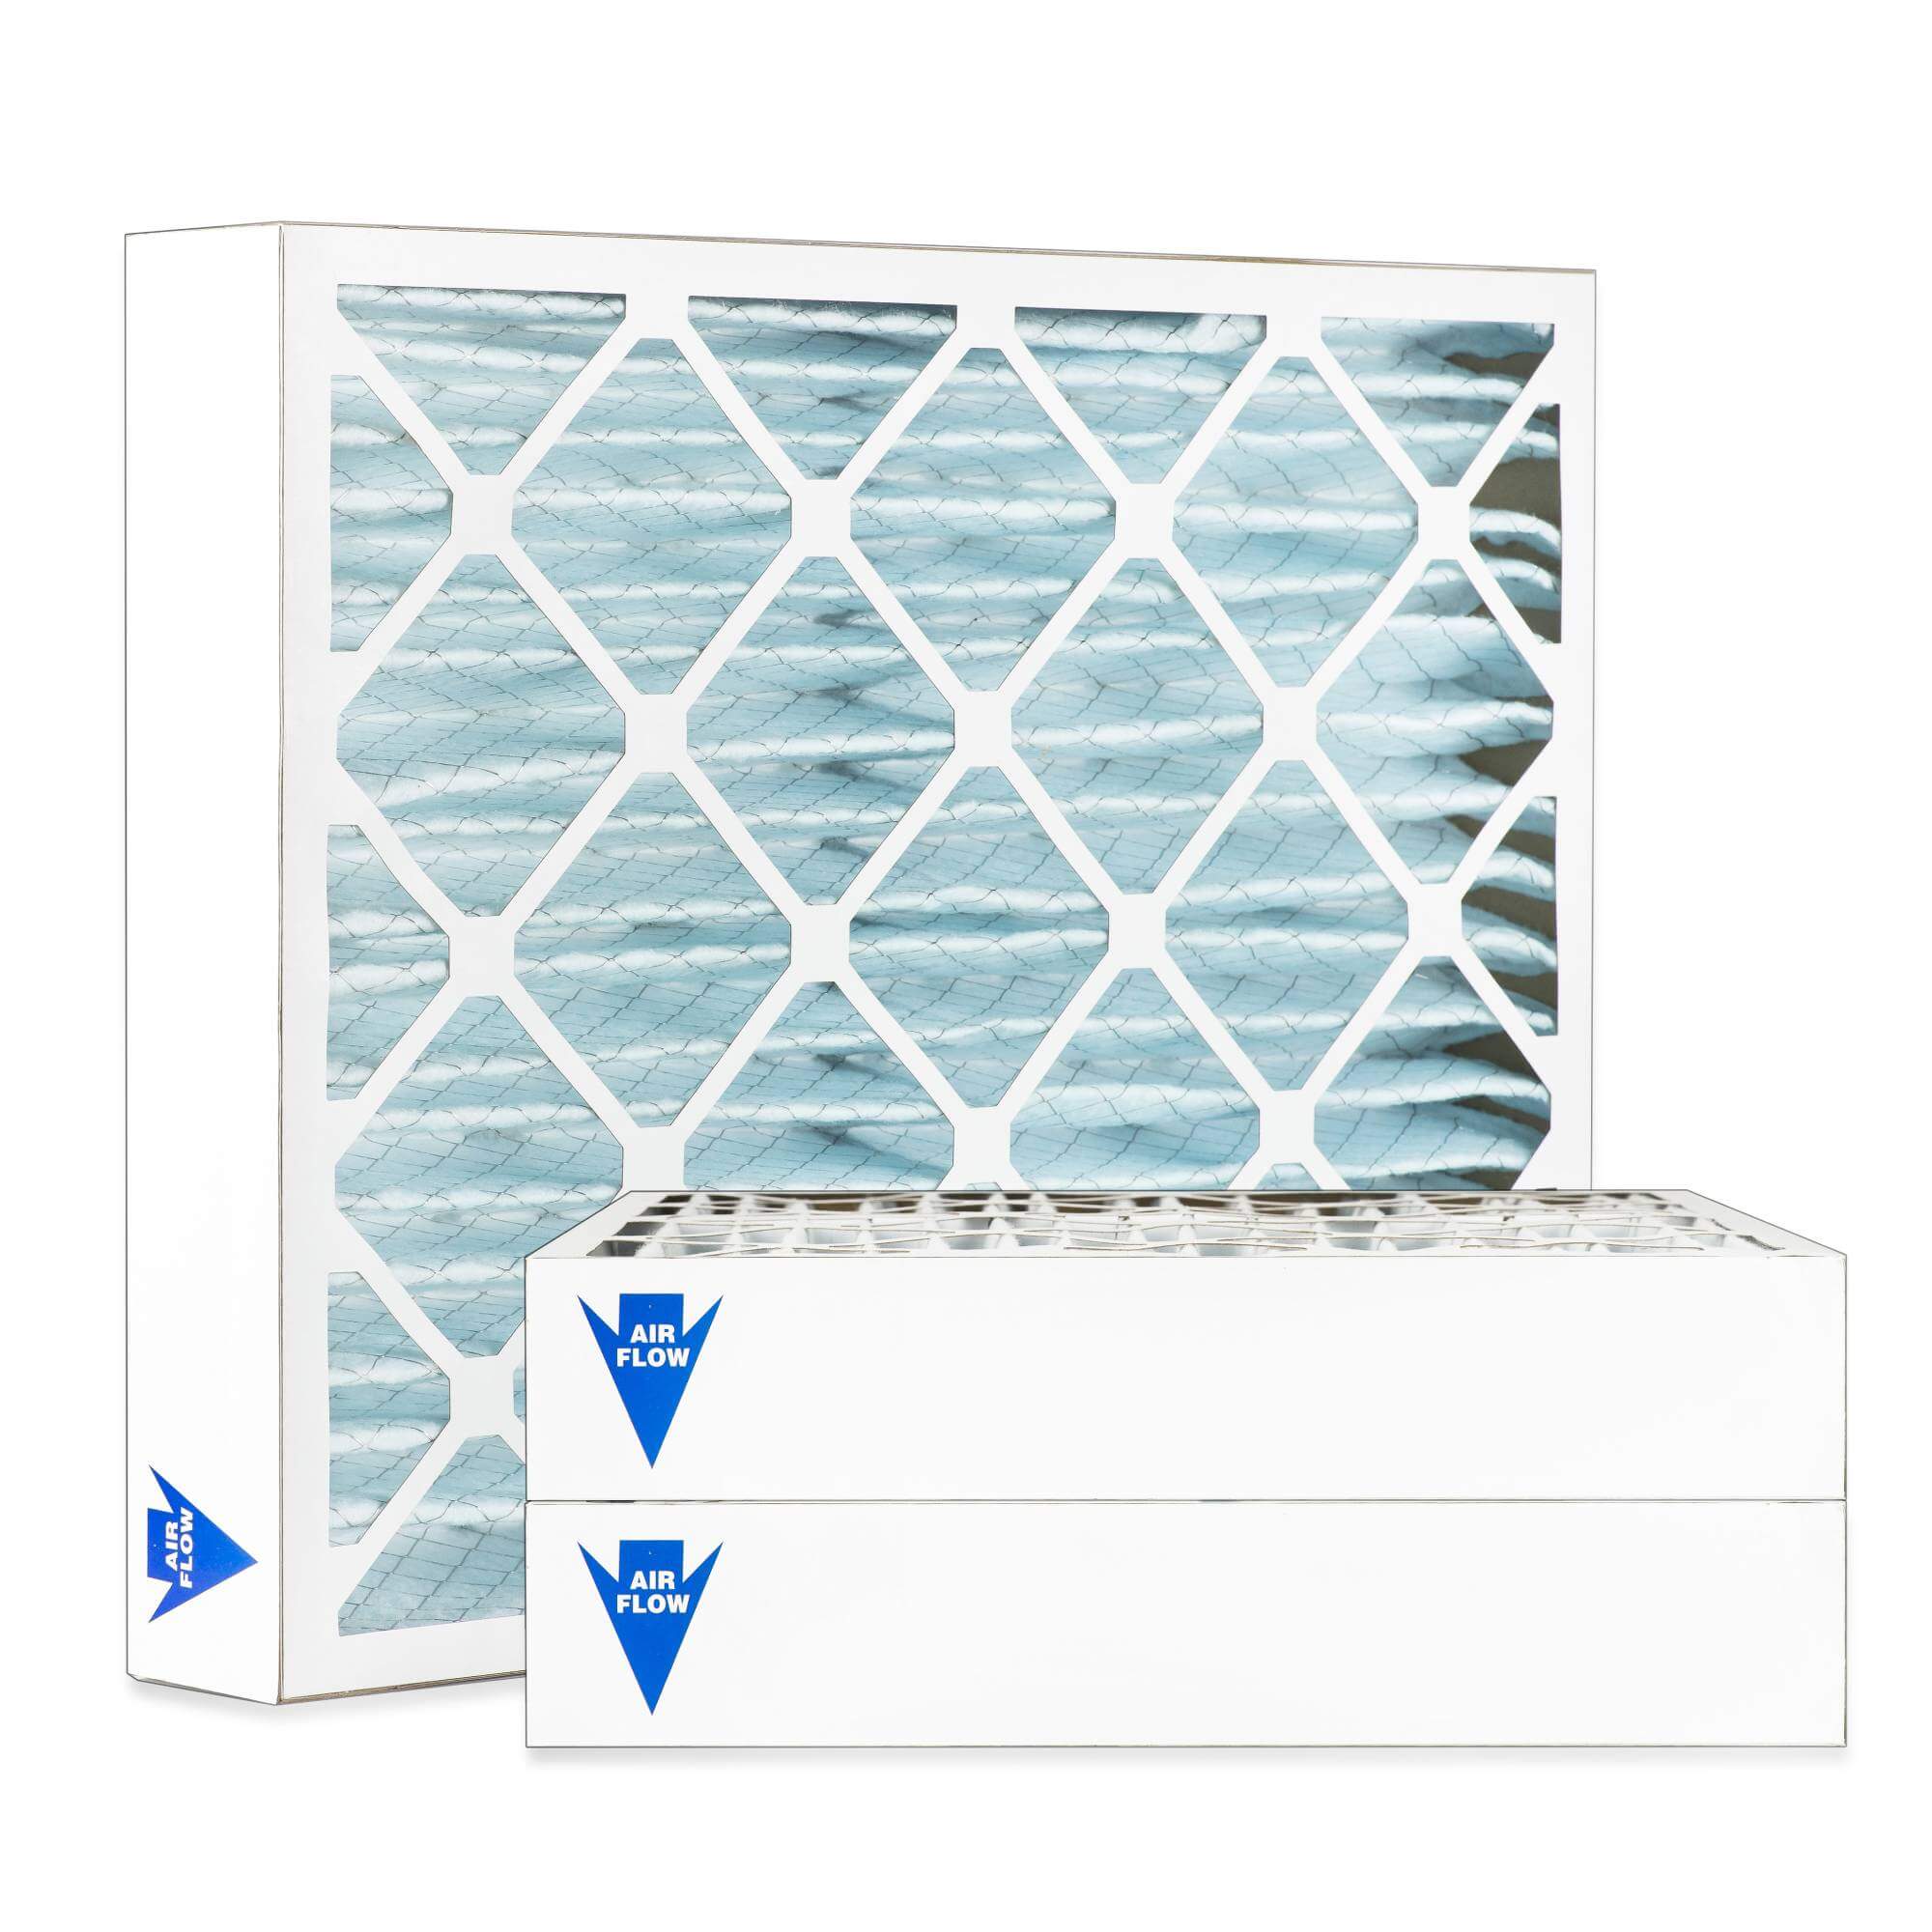 4" MERV 11 Furnace & AC Air Filter by Filters Fast&reg - 3-Pack thumbnail